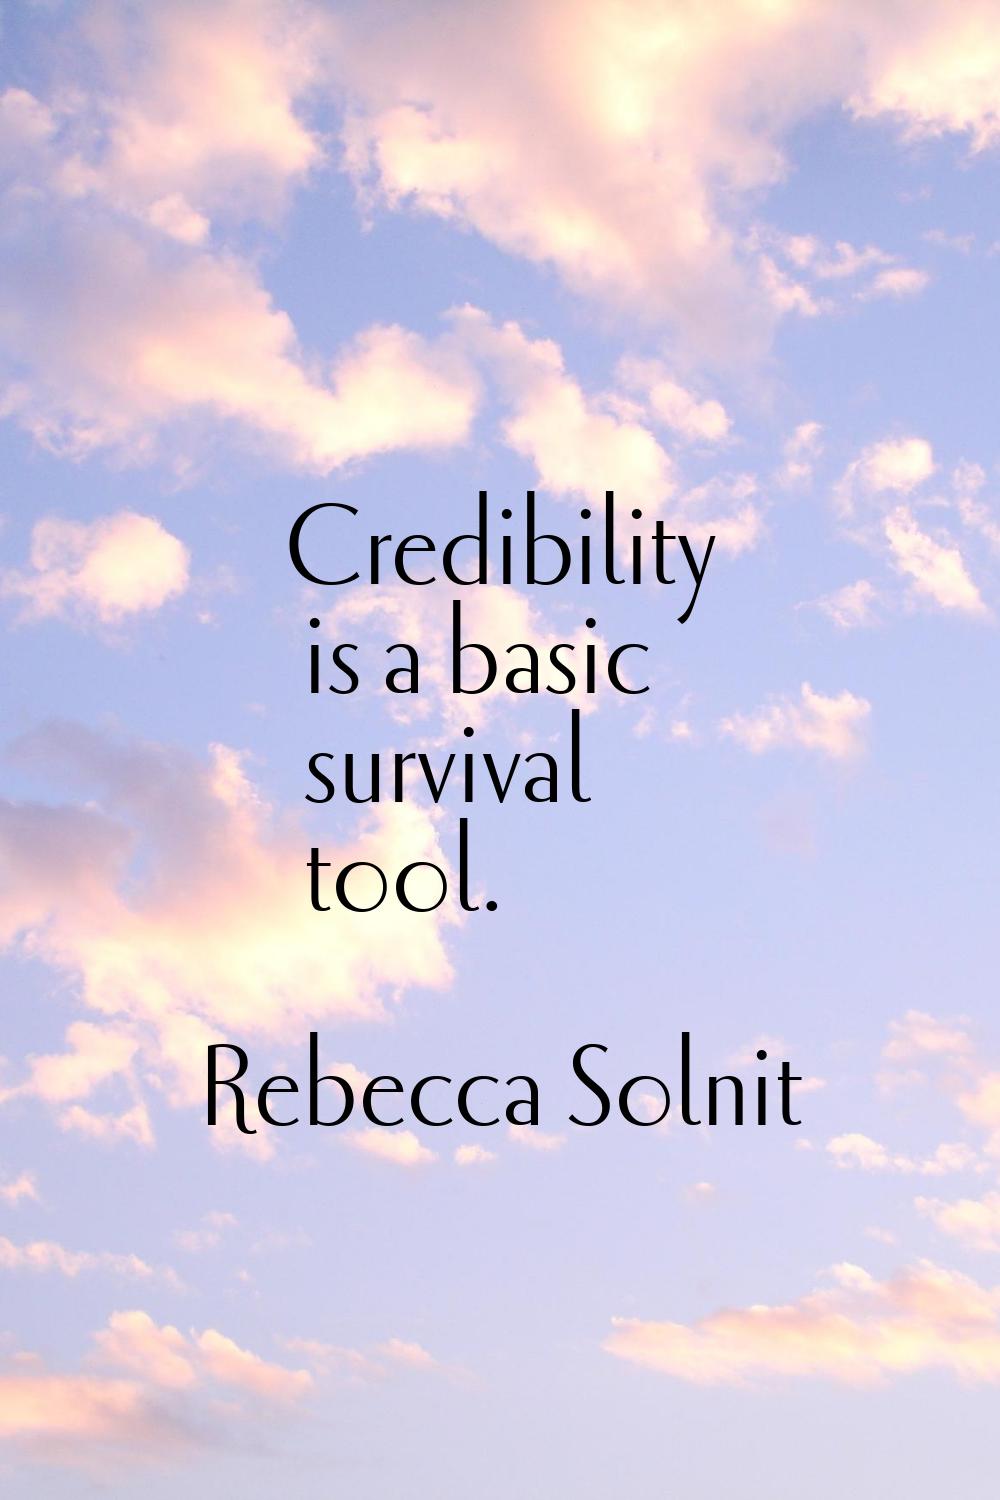 Credibility is a basic survival tool.